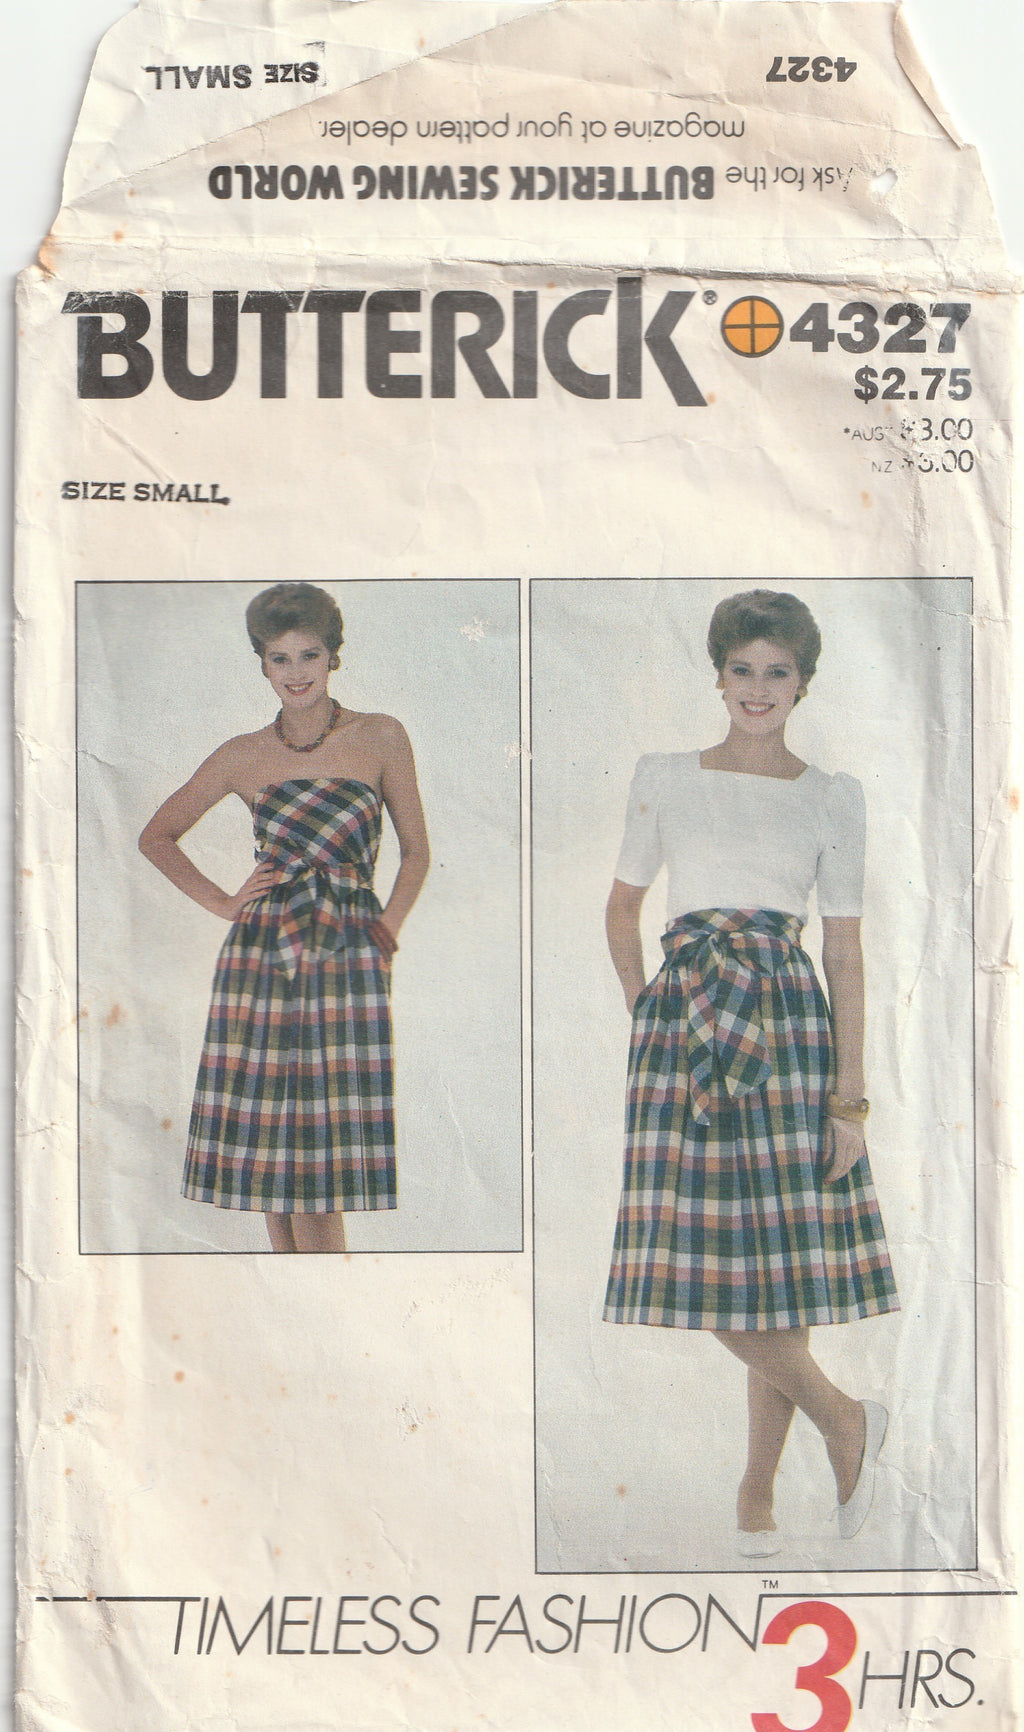 1980s vintage pattern wrap skirt or strapless dress small Butterick 4327